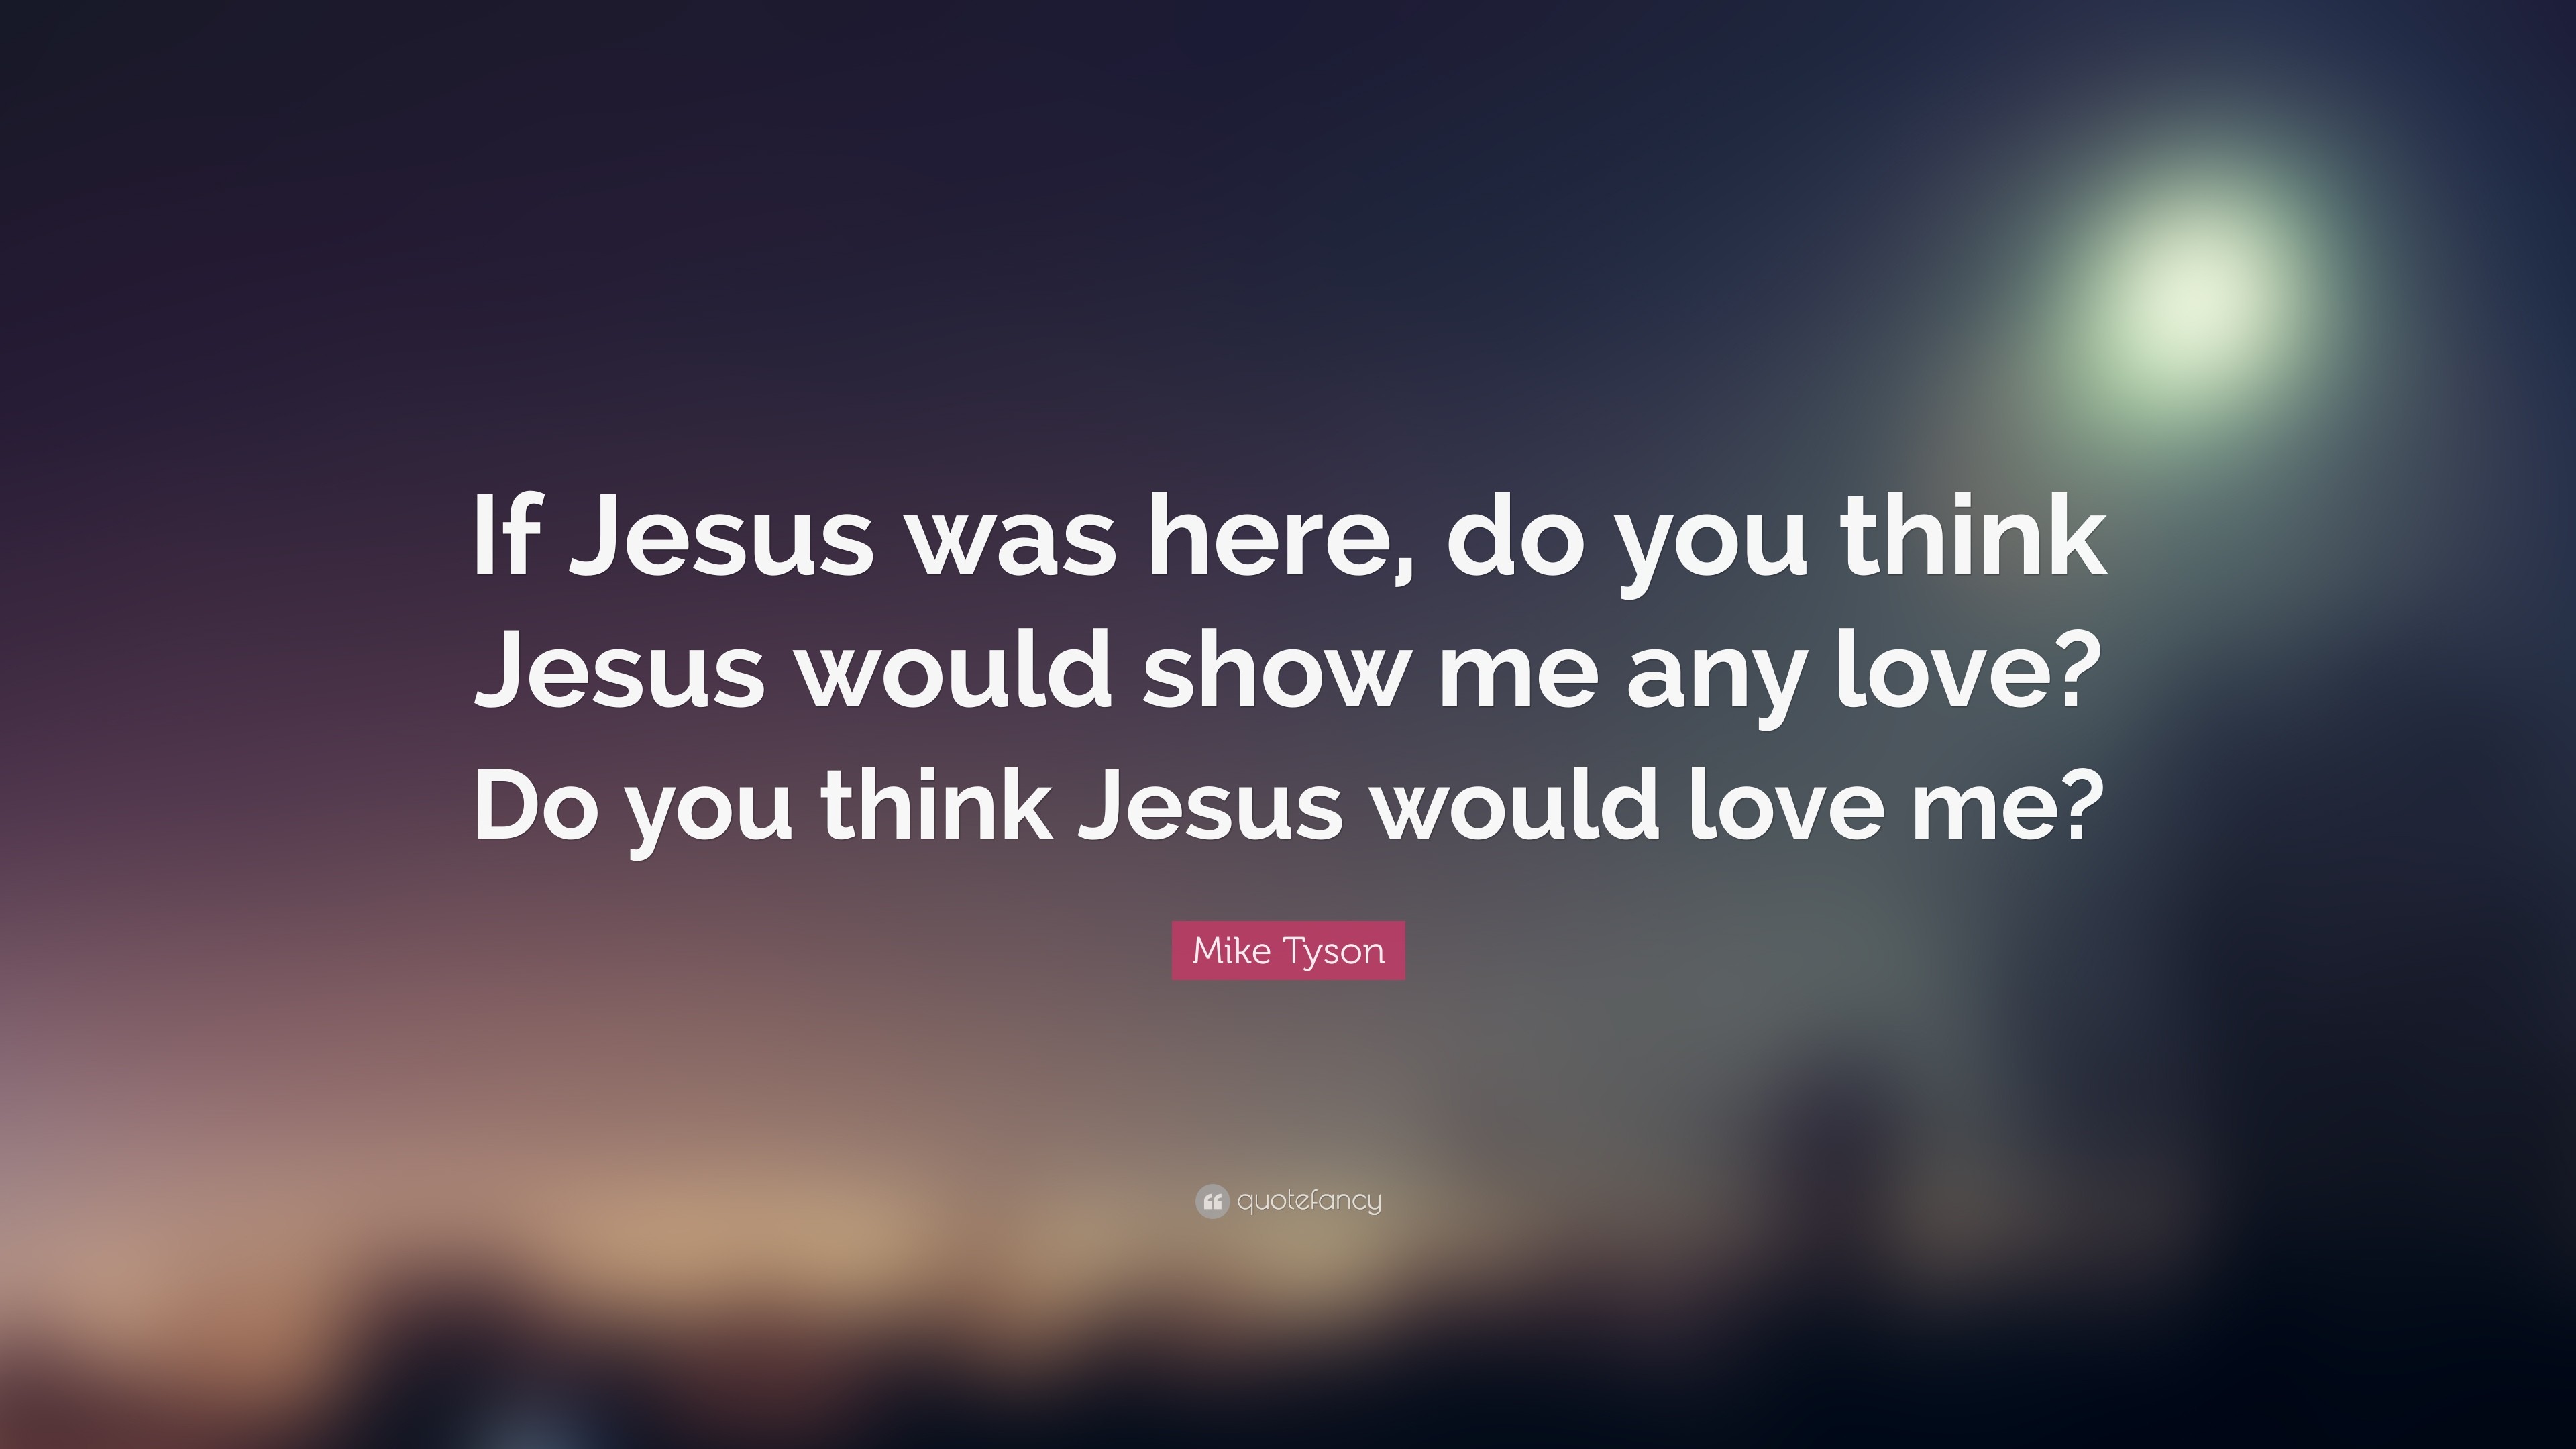 Mike Tyson Quote If Jesus was here, do you think Jesus would show